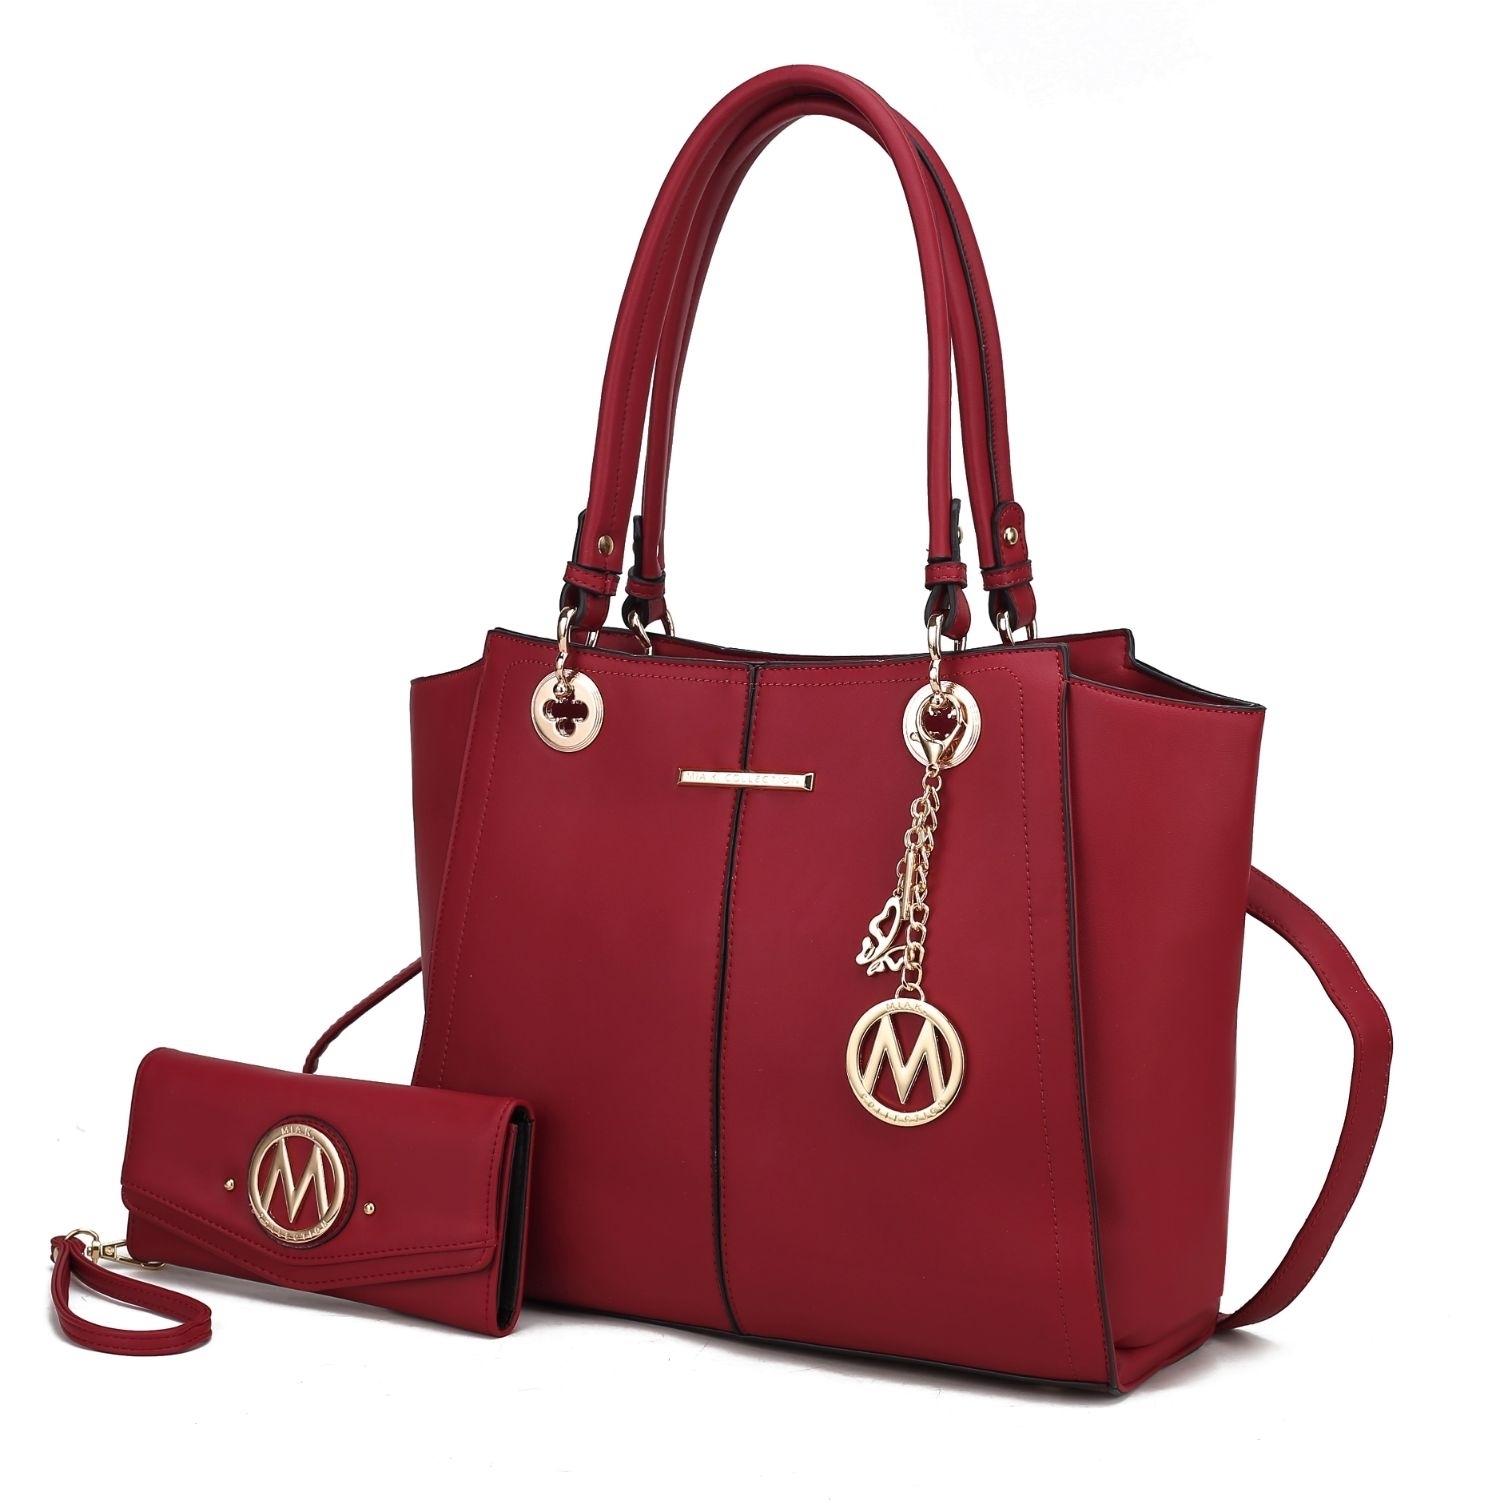 MKF Collection Ivy Vegan Leather Women's Tote Handbag By Mia K With Wallet -2 Pieces - Red